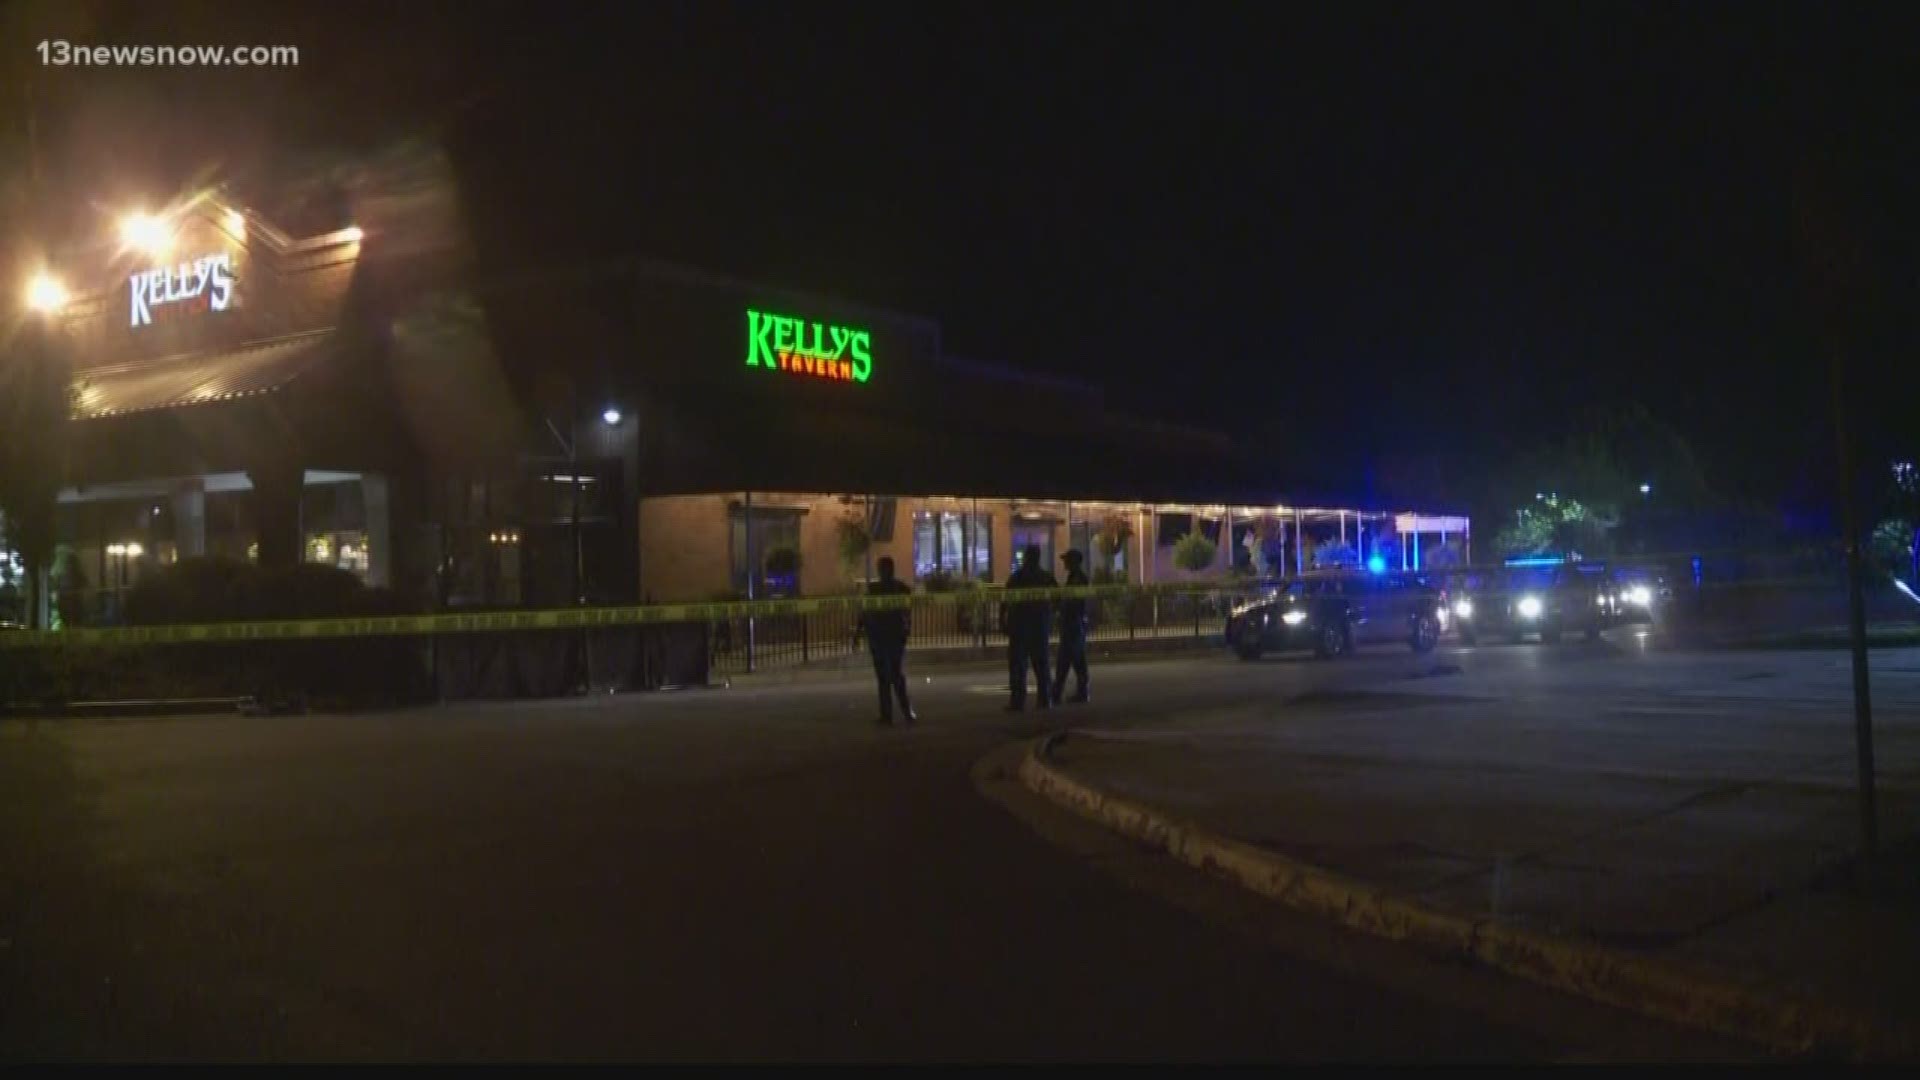 Chesapeake Police reports a man was shot and killed at a pub in Chesapeake. According to Chesapeake Police, the victim died at Kelly's Tavern. The suspect is in police custody. Police said the case is under investigation.